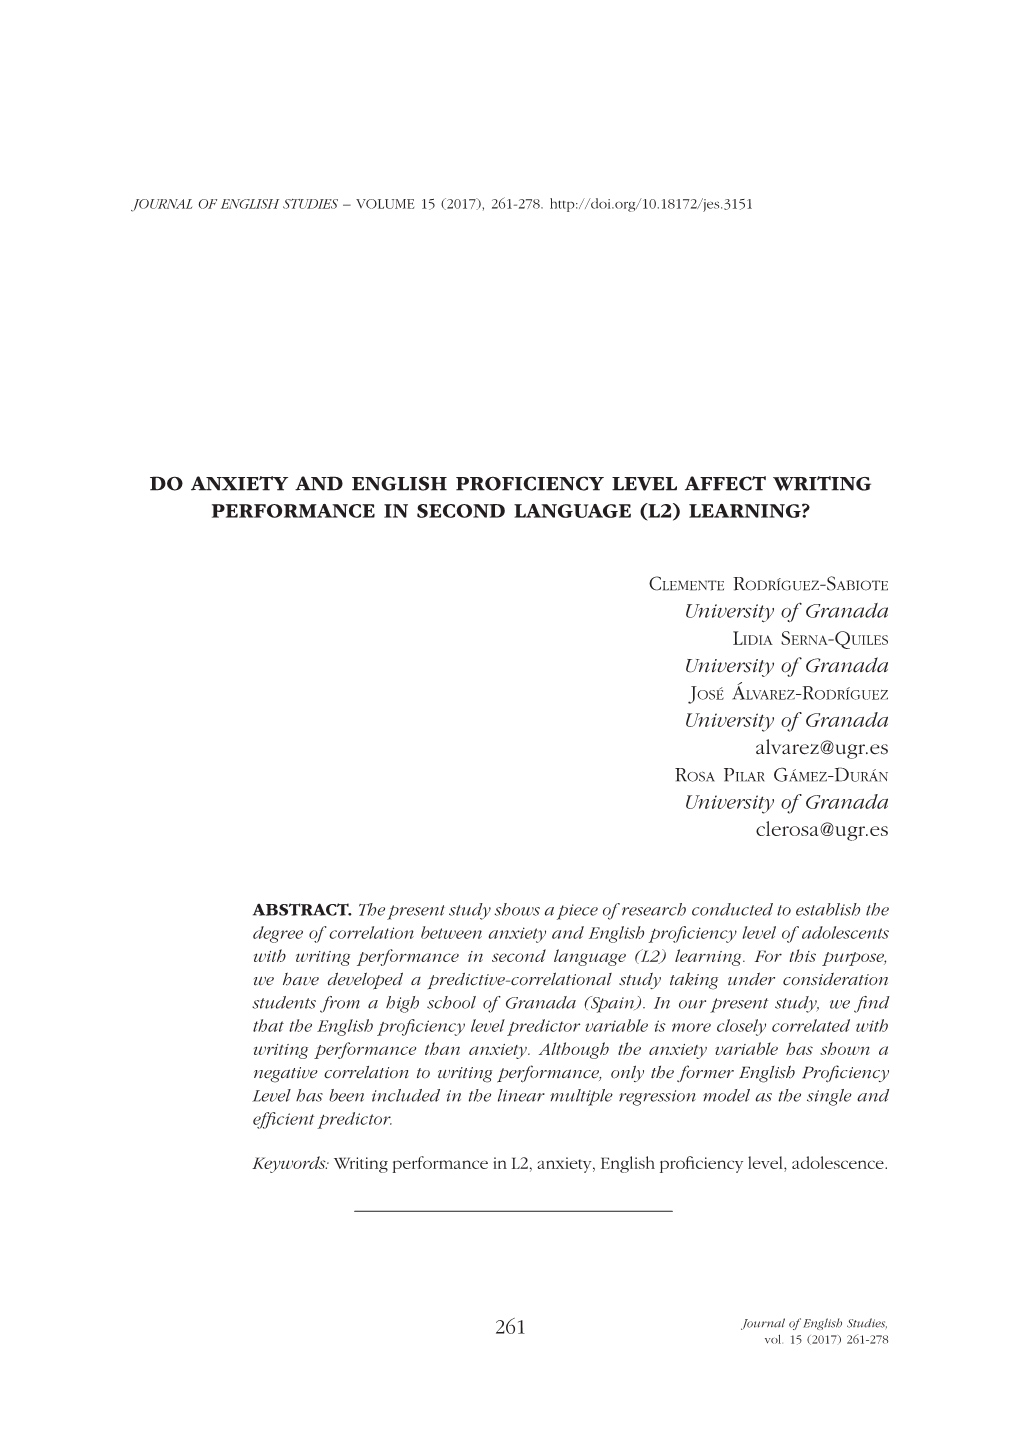 Do Anxiety and English Proficiency Level Affect Writing Performance in Second Language (L2) Learning?